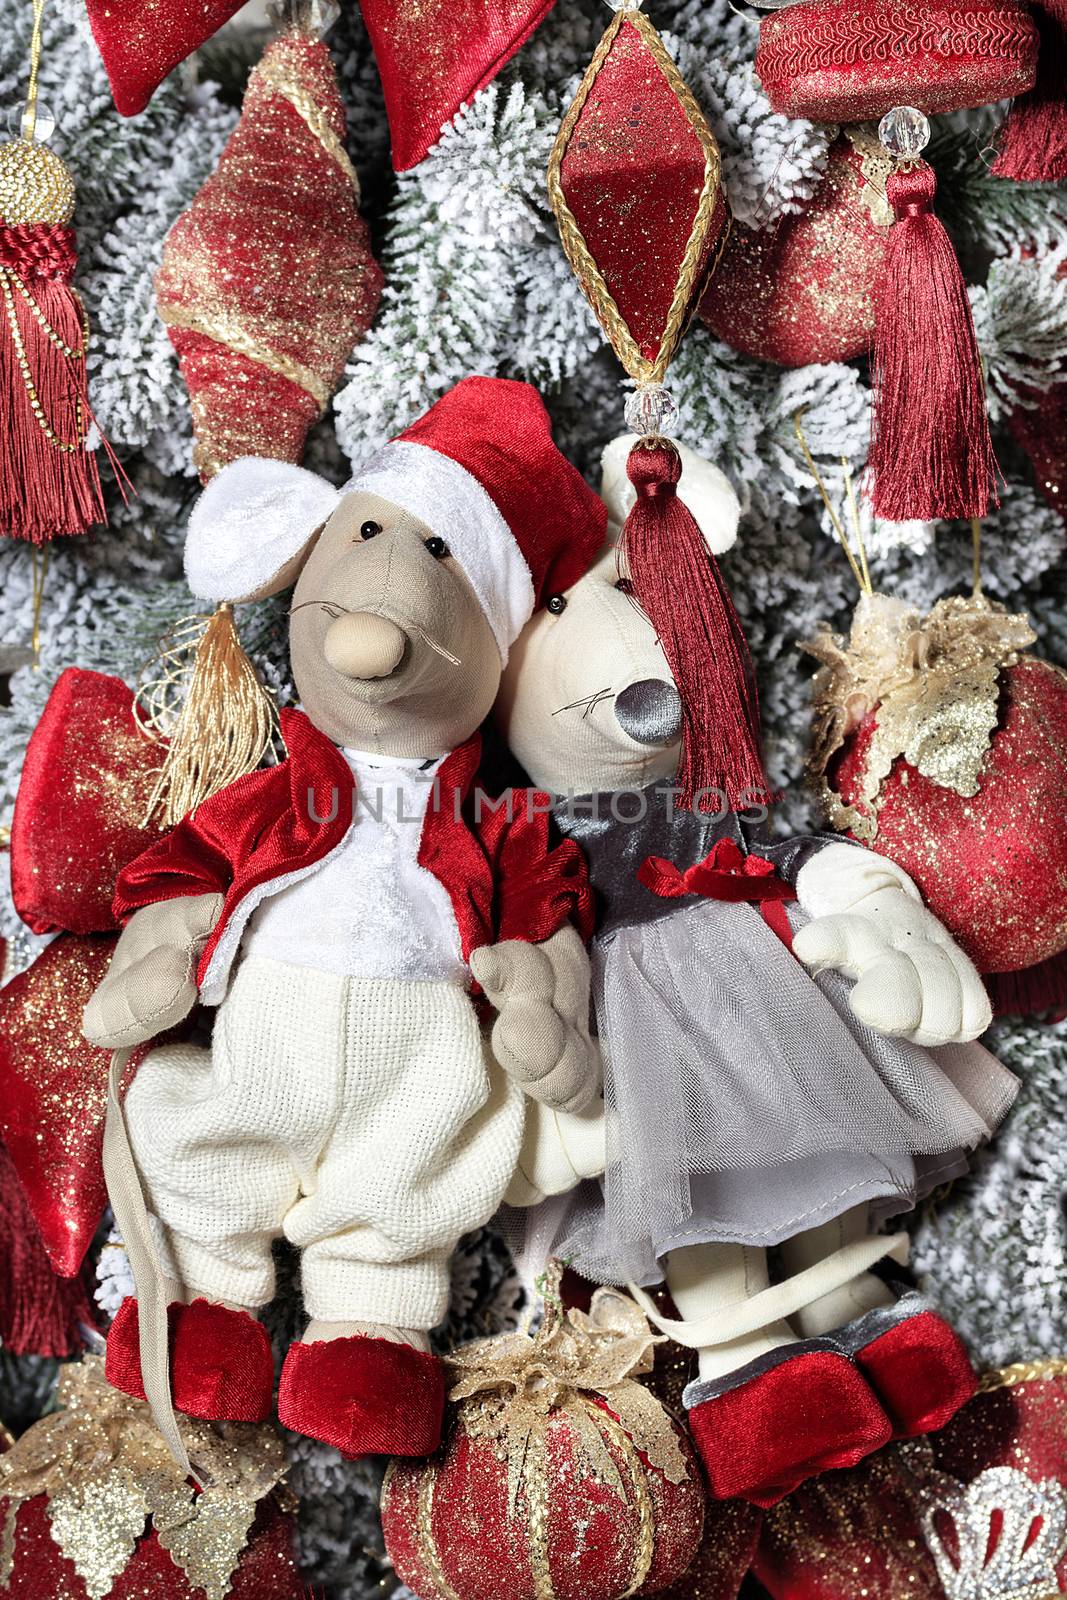 Little decorative toy mice dressed in a red frock coat and elegant dress are hanging on a Christmas tree on the eve of the rat year. New Year celebration concept, 2020 symbol, close-up view.